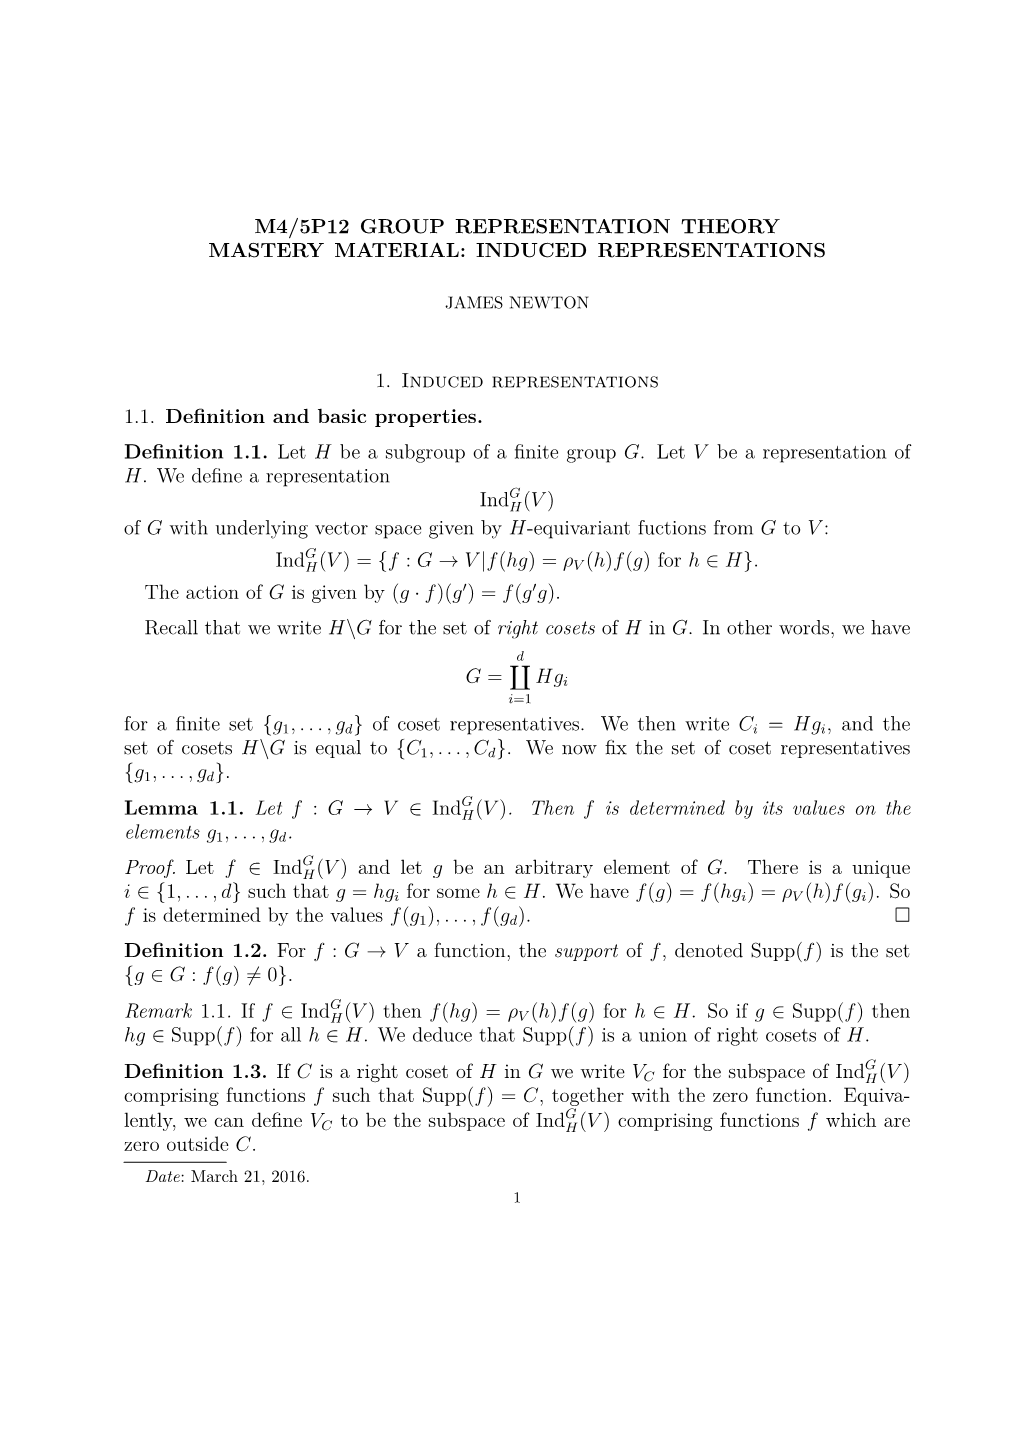 M4/5P12 Group Representation Theory Mastery Material: Induced Representations